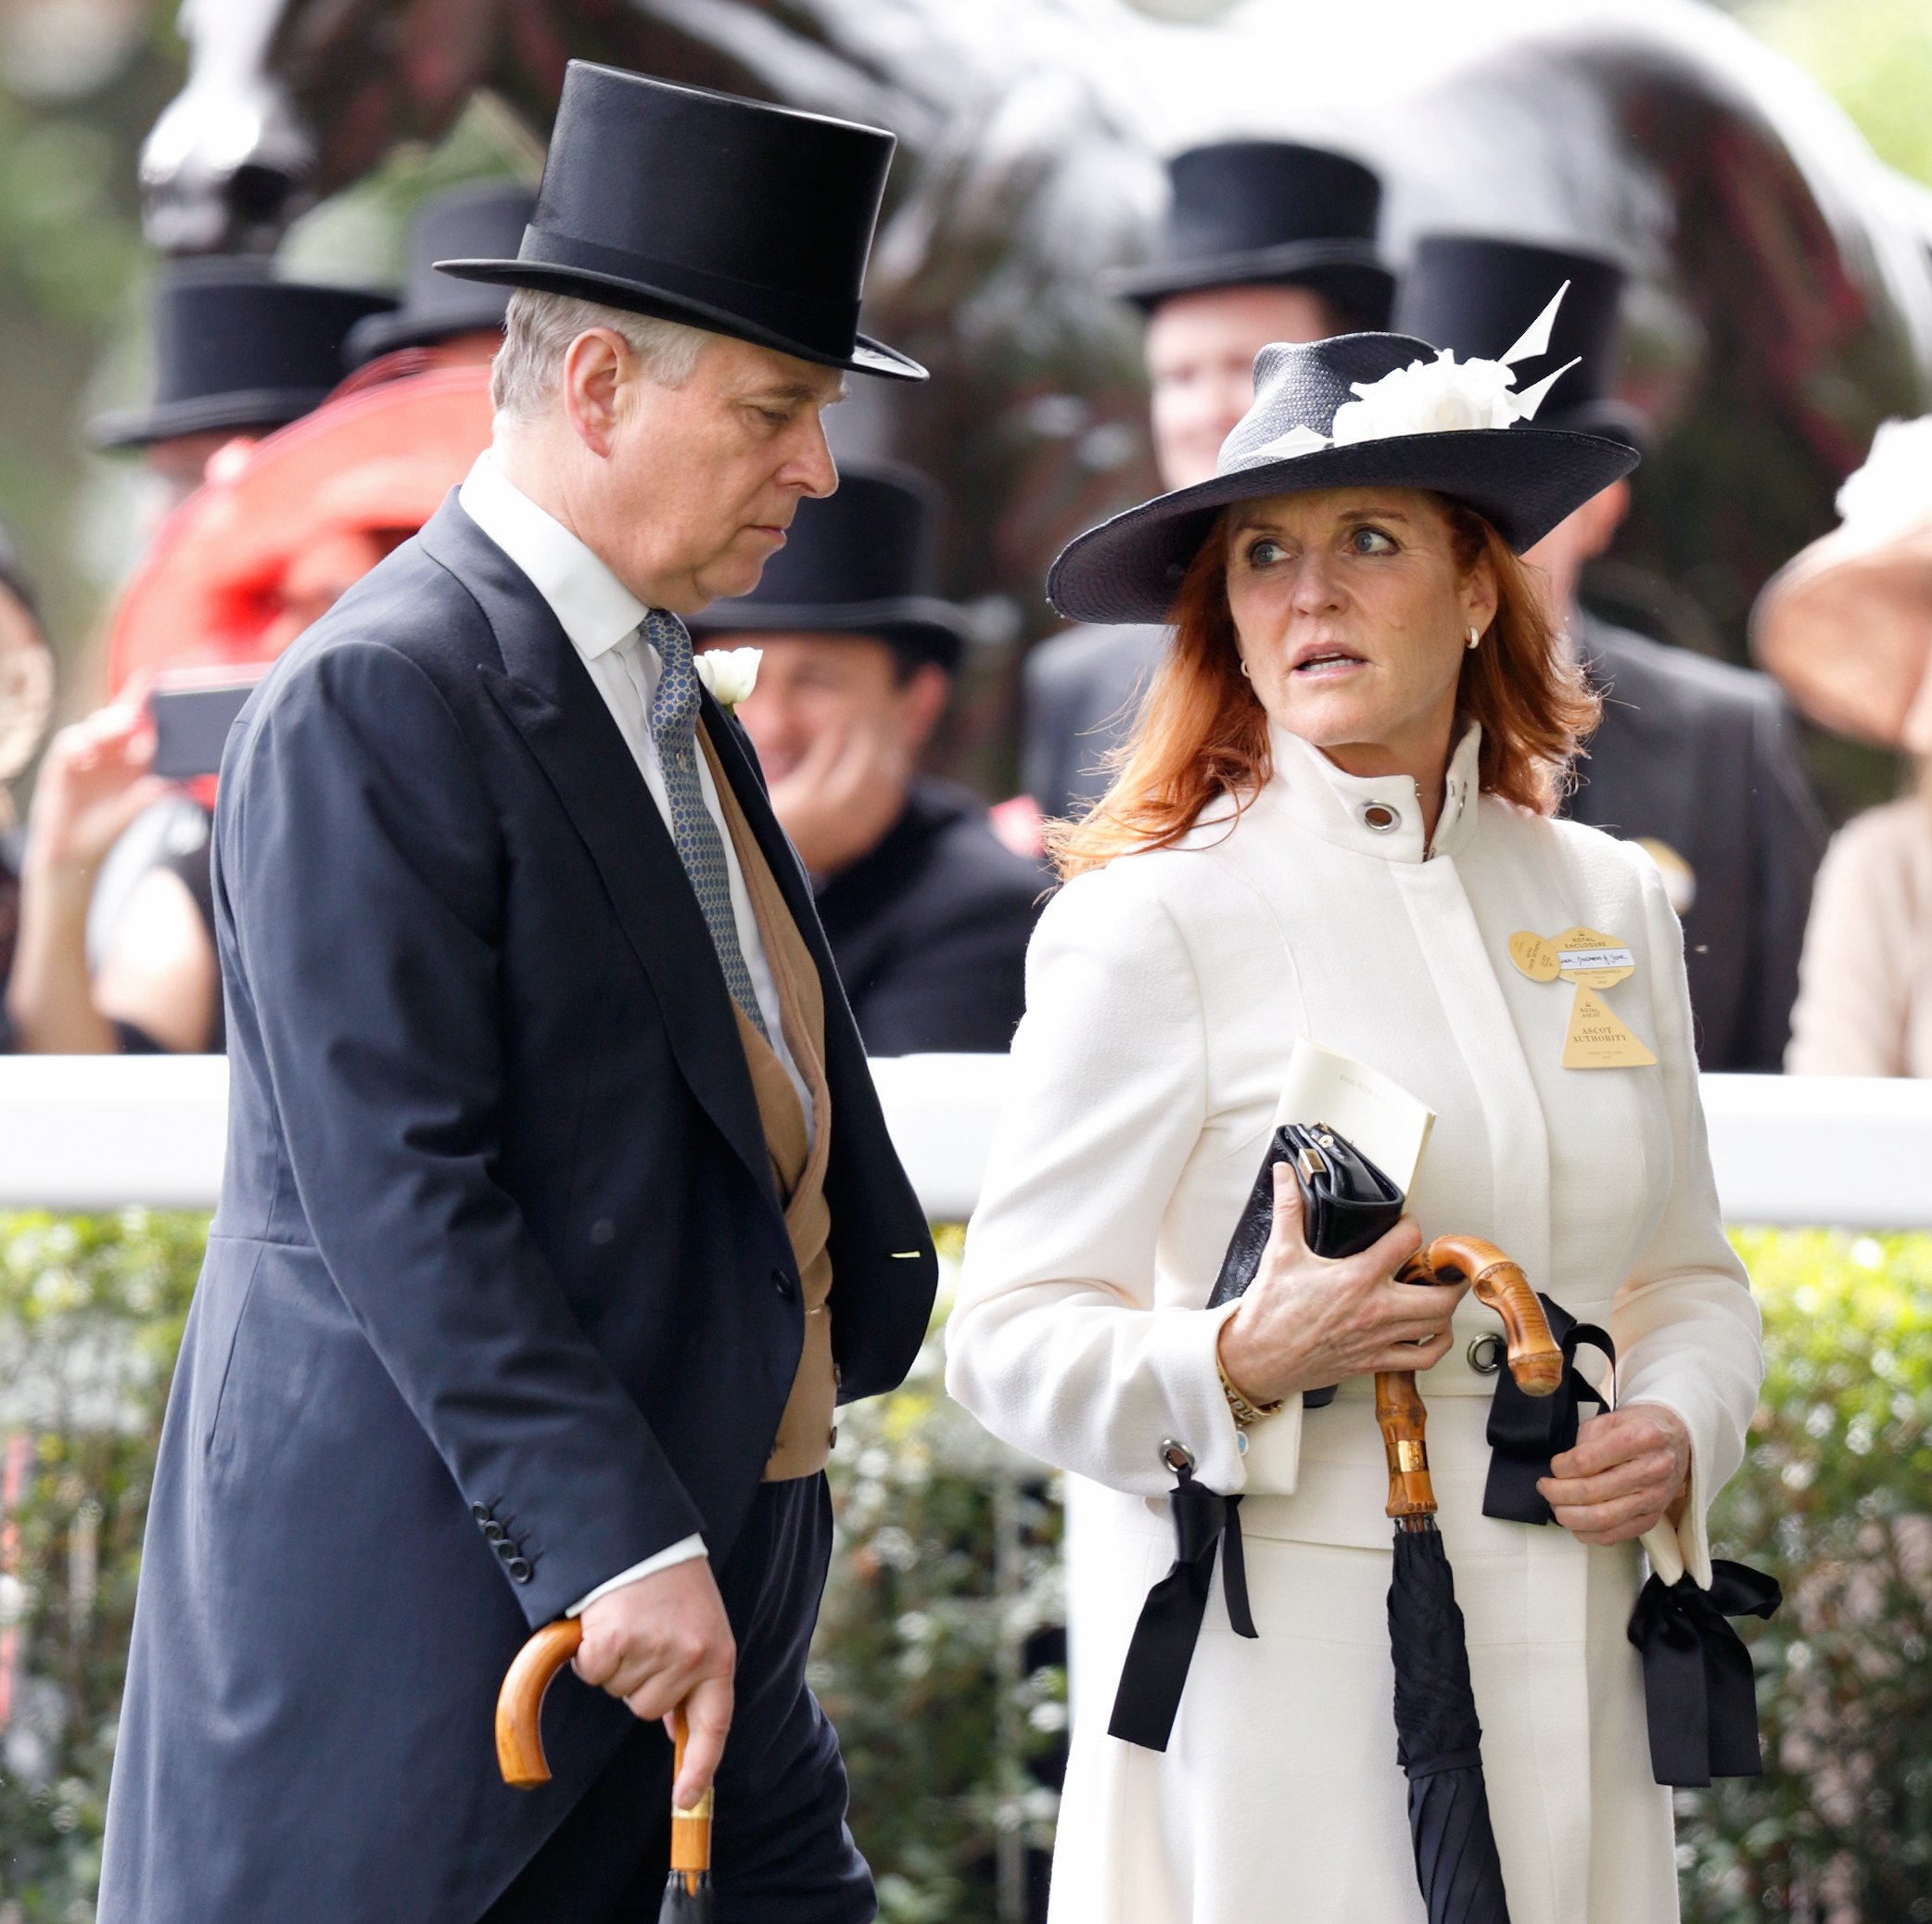 Prince Andrew, Duke of York and Sarah Ferguson, Duchess of York at the day 4 of Royal Ascot at Ascot Racecourse on June 17, 2016 in Ascot, England. | Source: Getty Images